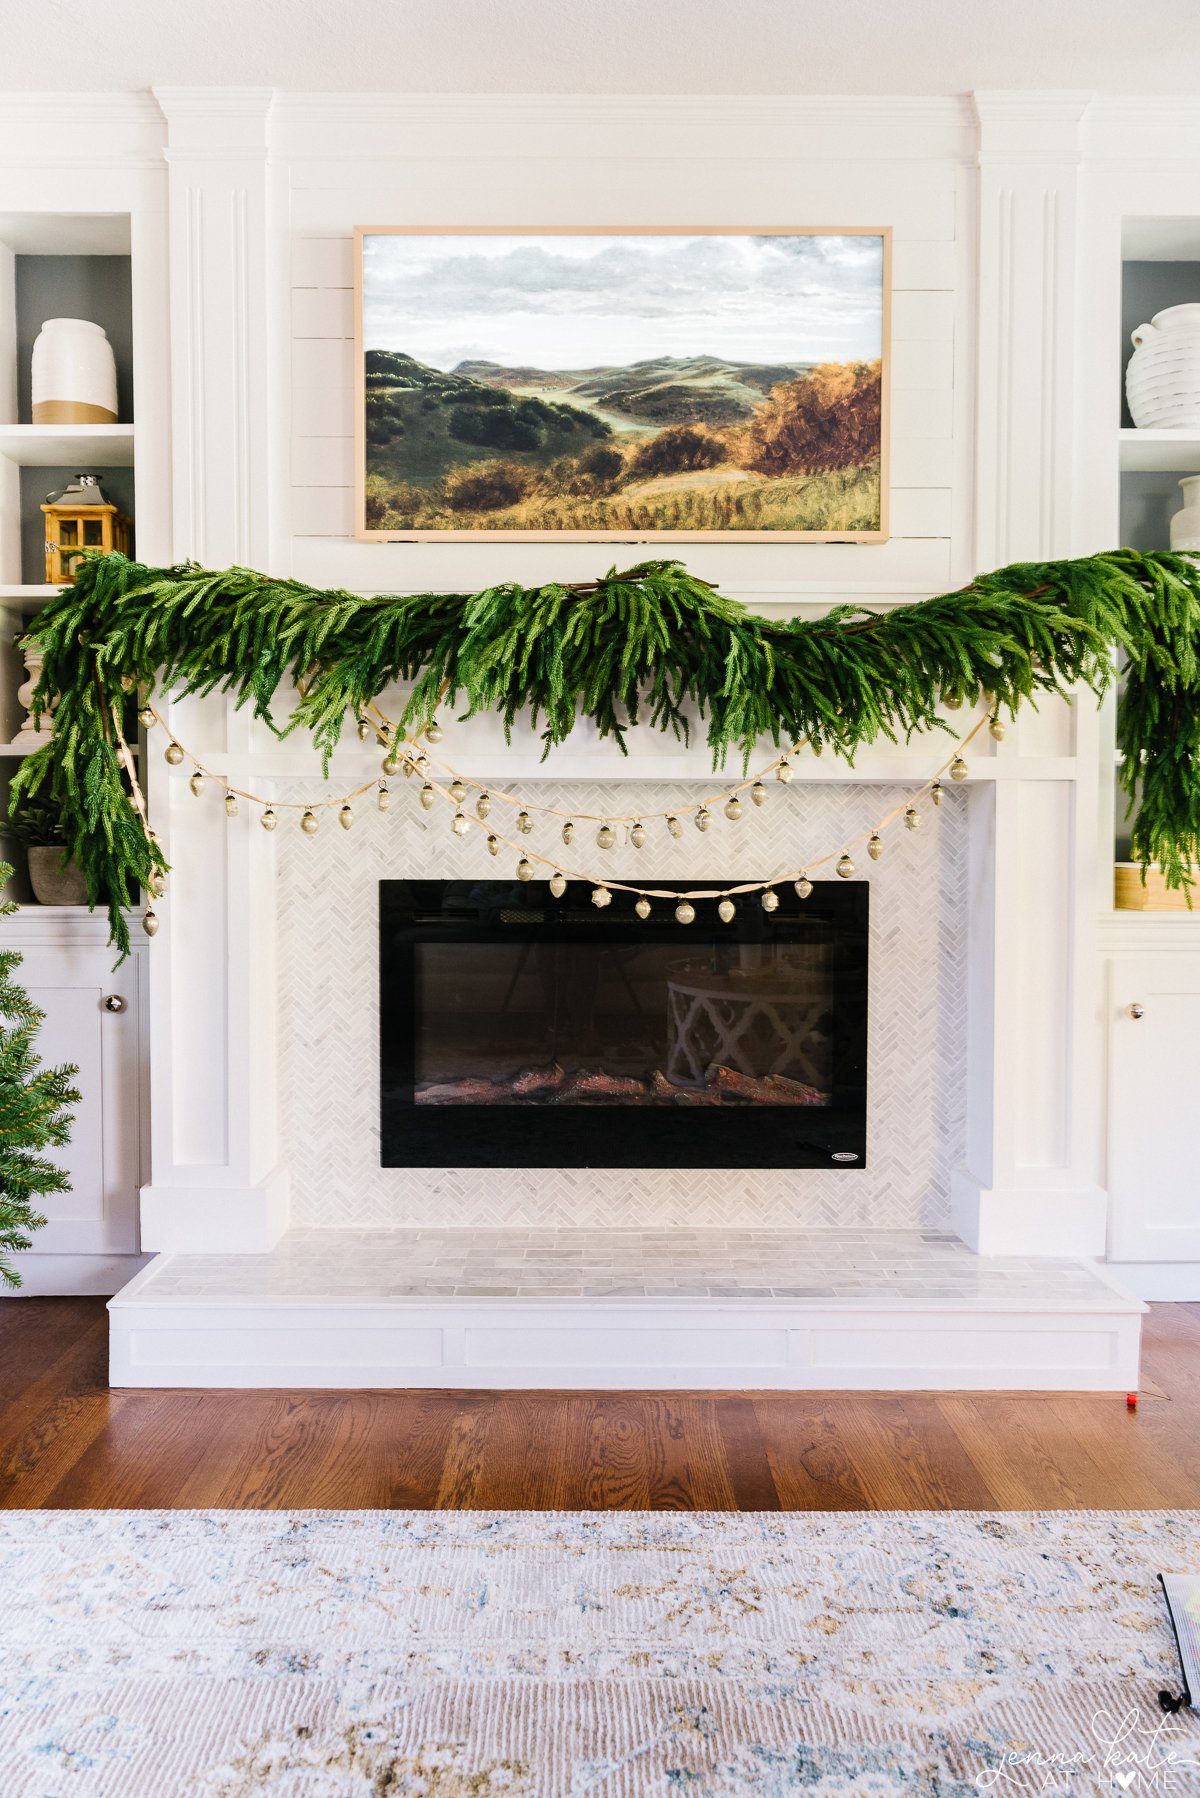 mantel with norfolk pine garland and tv above it